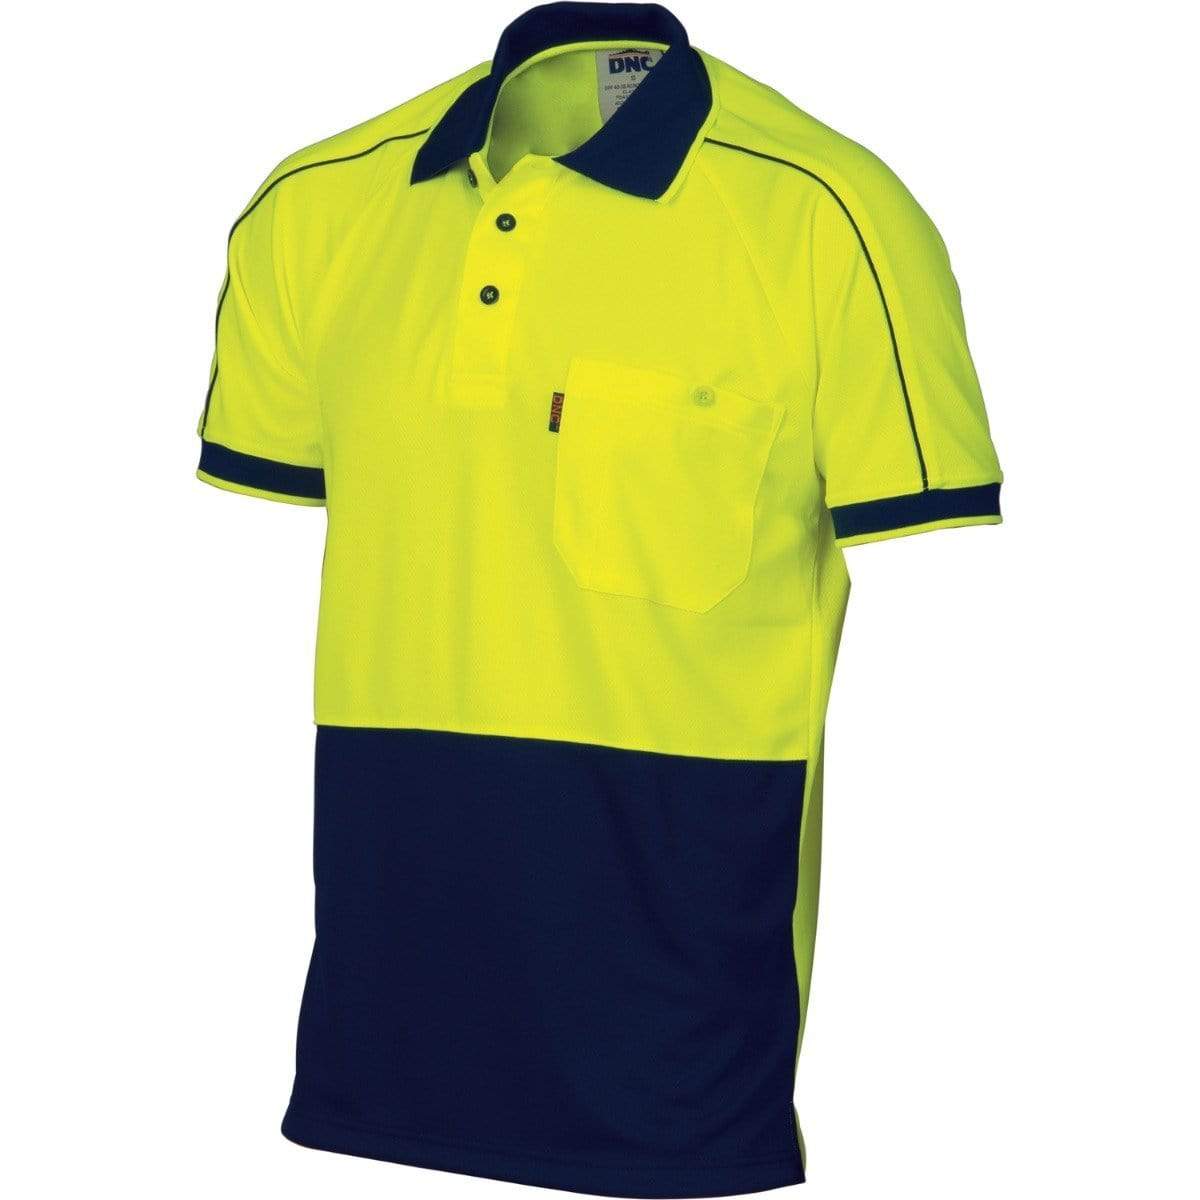 Dnc Workwear Hi-vis Cool-breathe Double Piping Short Sleeve Polo - 3753 Work Wear DNC Workwear Yellow/Navy XS 